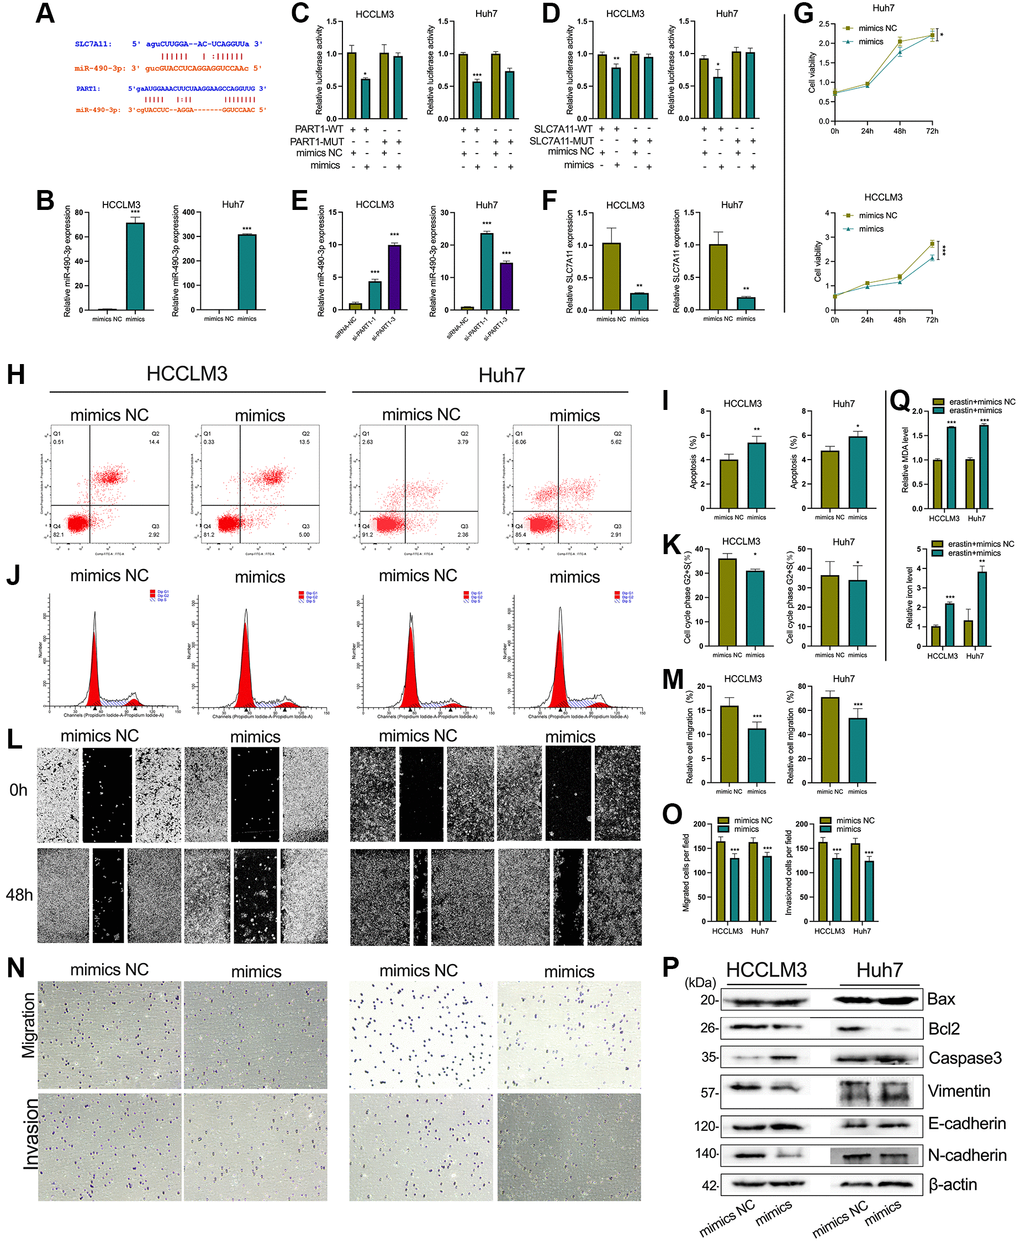 PART1 promotes HCC progression and inhibits ferroptosis by sponging miR-490-3p. (A) The interaction of miR-490-3p with PART1 and SLC7A11 predicted by ENCORI and LncBase v2 database. (B) The relative expression of miR-490-3p detected by RT-qPCR in HCCLM3 and Huh7 cells treated with miR-490-3p mimics or mimics NC. (C, D) Results of dual-luciferase reporter assay for miRNA-490-3p targeting PART1 and SLC7A11 mRNA 3'-UTR in HCCLM3 and Huh7 cells, respectively. (E) The relative expression of miR-490-3p in HCCLM3 and Huh7 cells transfected with siRNA-PART1.1 and -PART1.3. (F) The relative expression of SLC7A11 detected by qPCR in HCCLM3 and Huh7 cells treated with miR-490-3p mimics or mimics NC. (G) The cell proliferation was measured by the CCK-8 assays in HCCLM3 and Huh7 cells treated with miR-490-3p mimics or mimics NC. (H–K) The cell apoptosis and cell cycle were assessed by flow cytometry analysis in HCCLM3 and Huh7 cells treated with miR-490-3p mimics or mimics NC. (L, M) The migration was examined by wound healing assays in HCCLM3 and Huh7 cells treated with miR-490-3p mimics or mimics NC. (N, O) The cell migration and invasion were detected by Transwell assays (40 × objective lens) in HCCLM3 and Huh7 cells treated with miR-490-3p mimics or mimics NC. (P) The apoptosis and EMT-related proteins were detected by Western blotting. (Q) The relative levels of MDA and iron in HCCLM3 and Huh7 cells treated with miR-490-3p mimics or mimics NC in the erastin-induced ferroptosis assay. *p **p ***p 